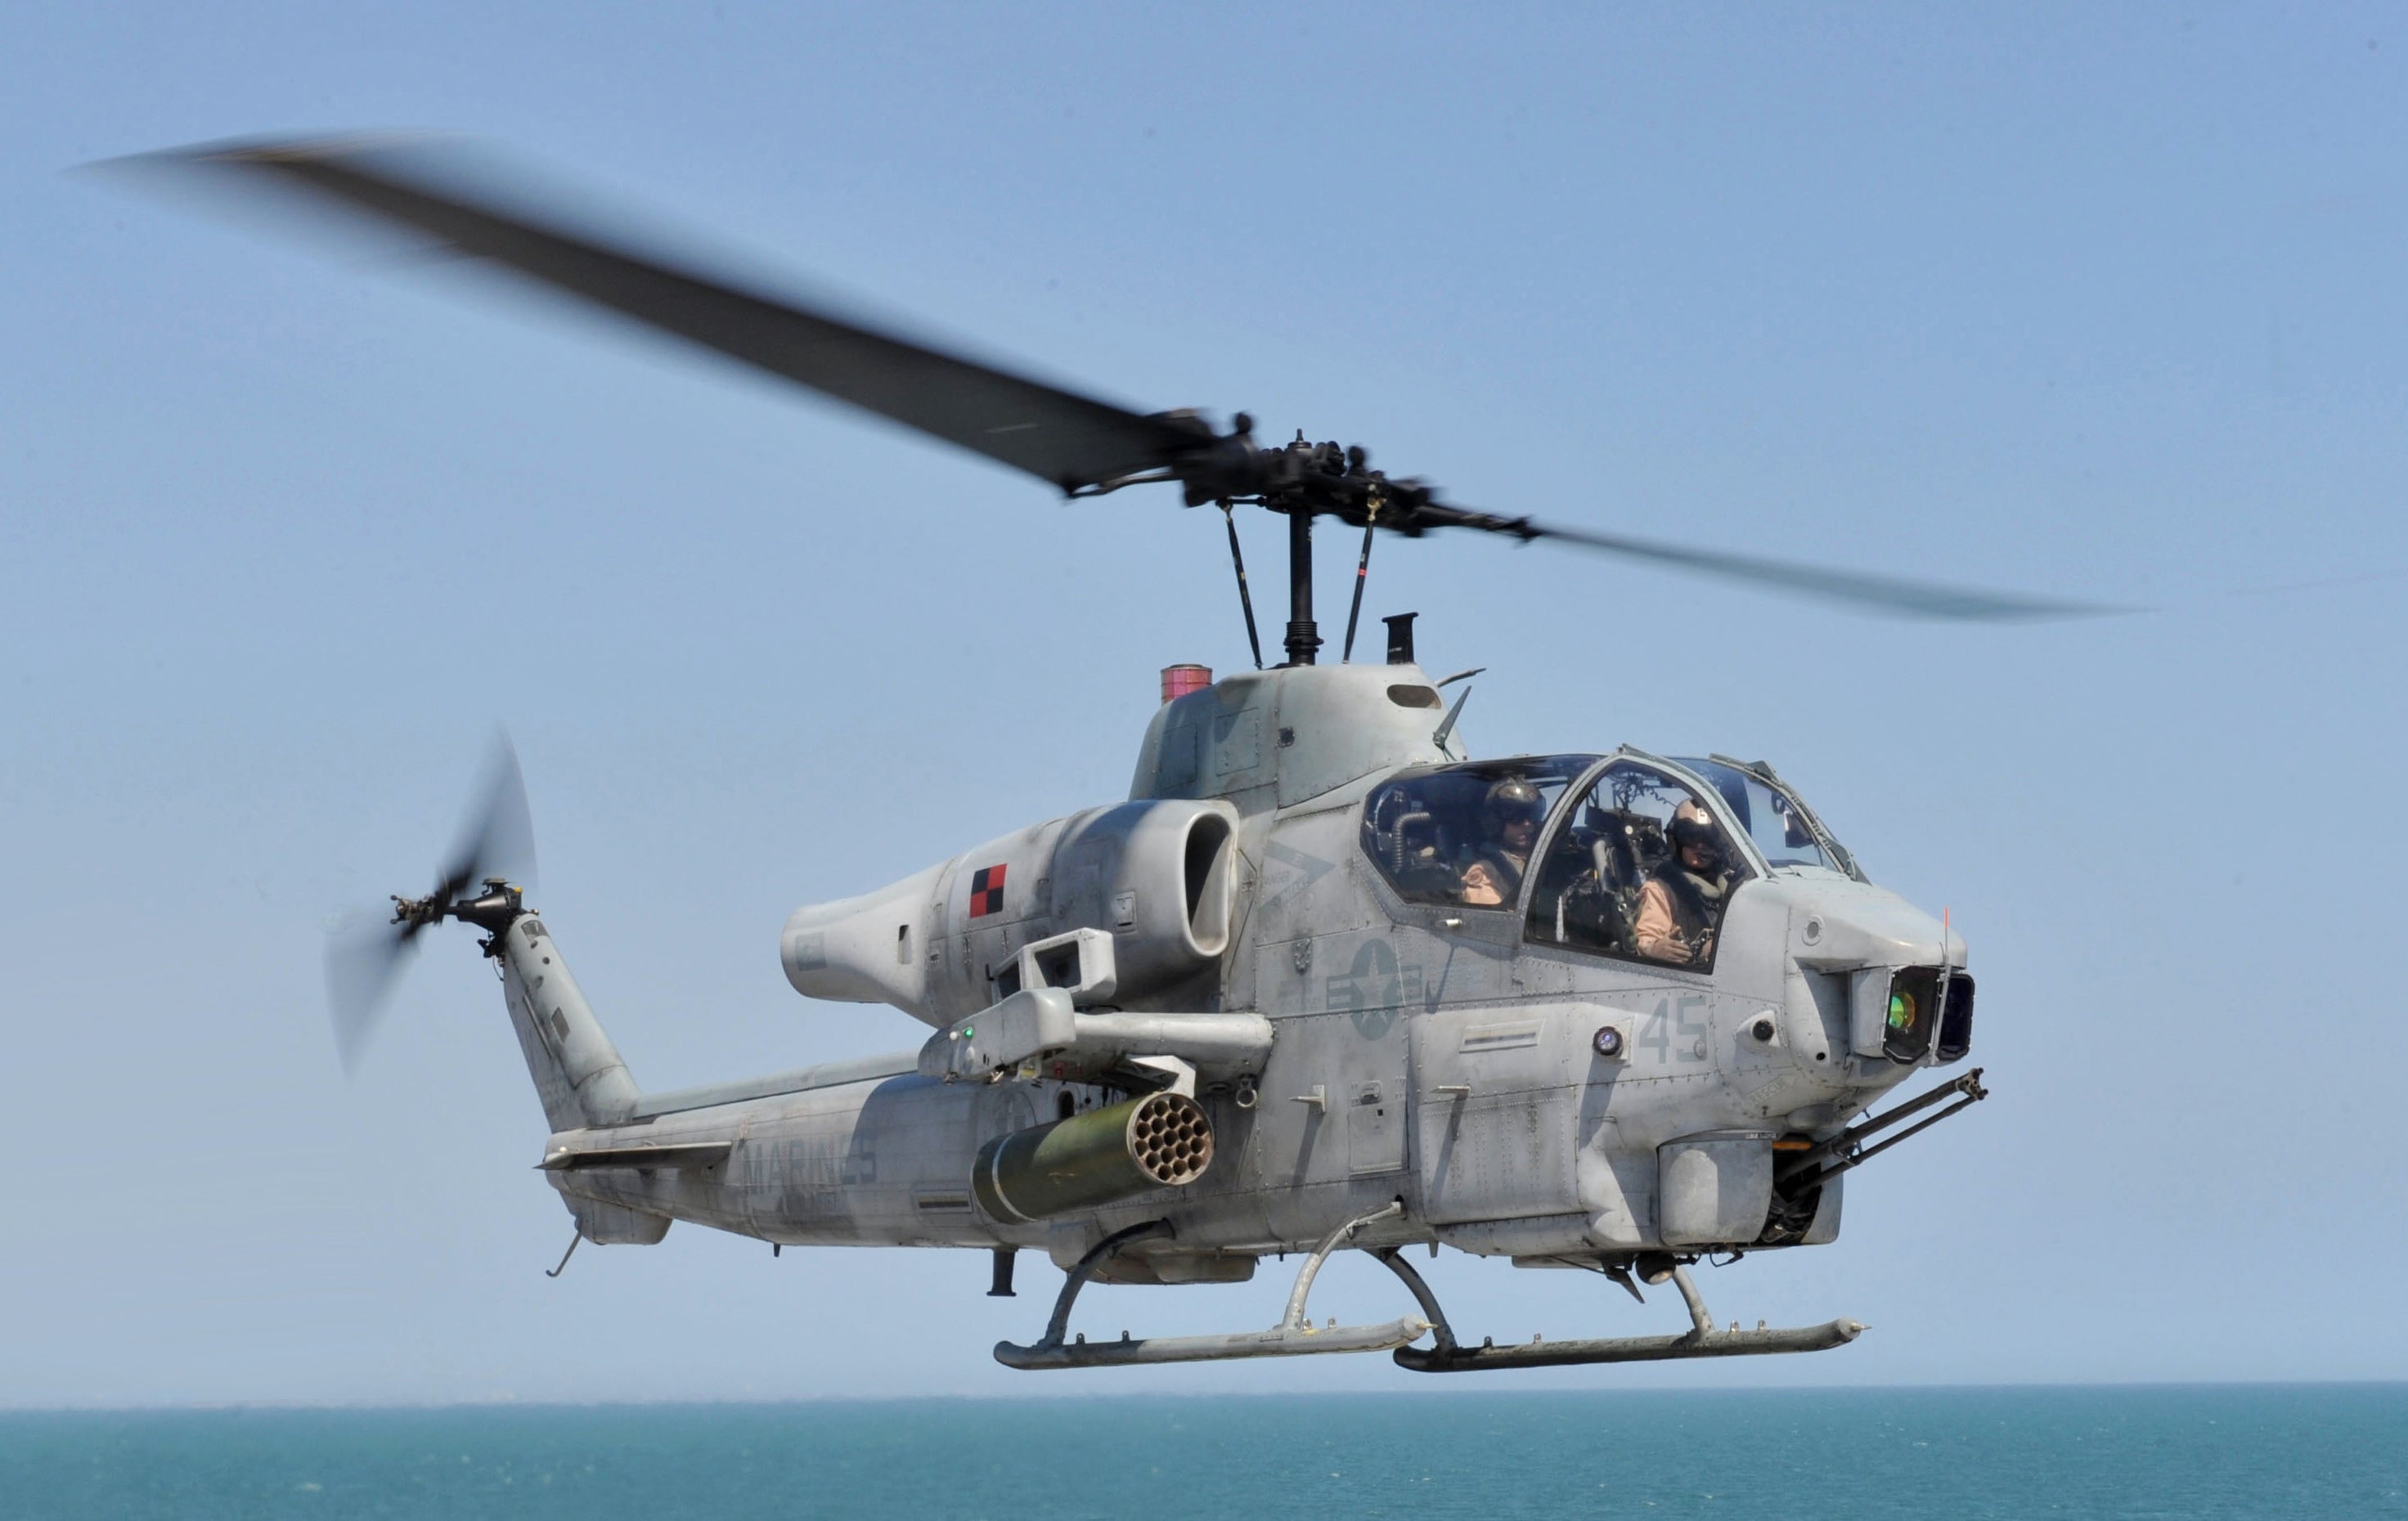 The Marine Corps AH-1W Super Cobra makes its final flight after more than 30 years of service